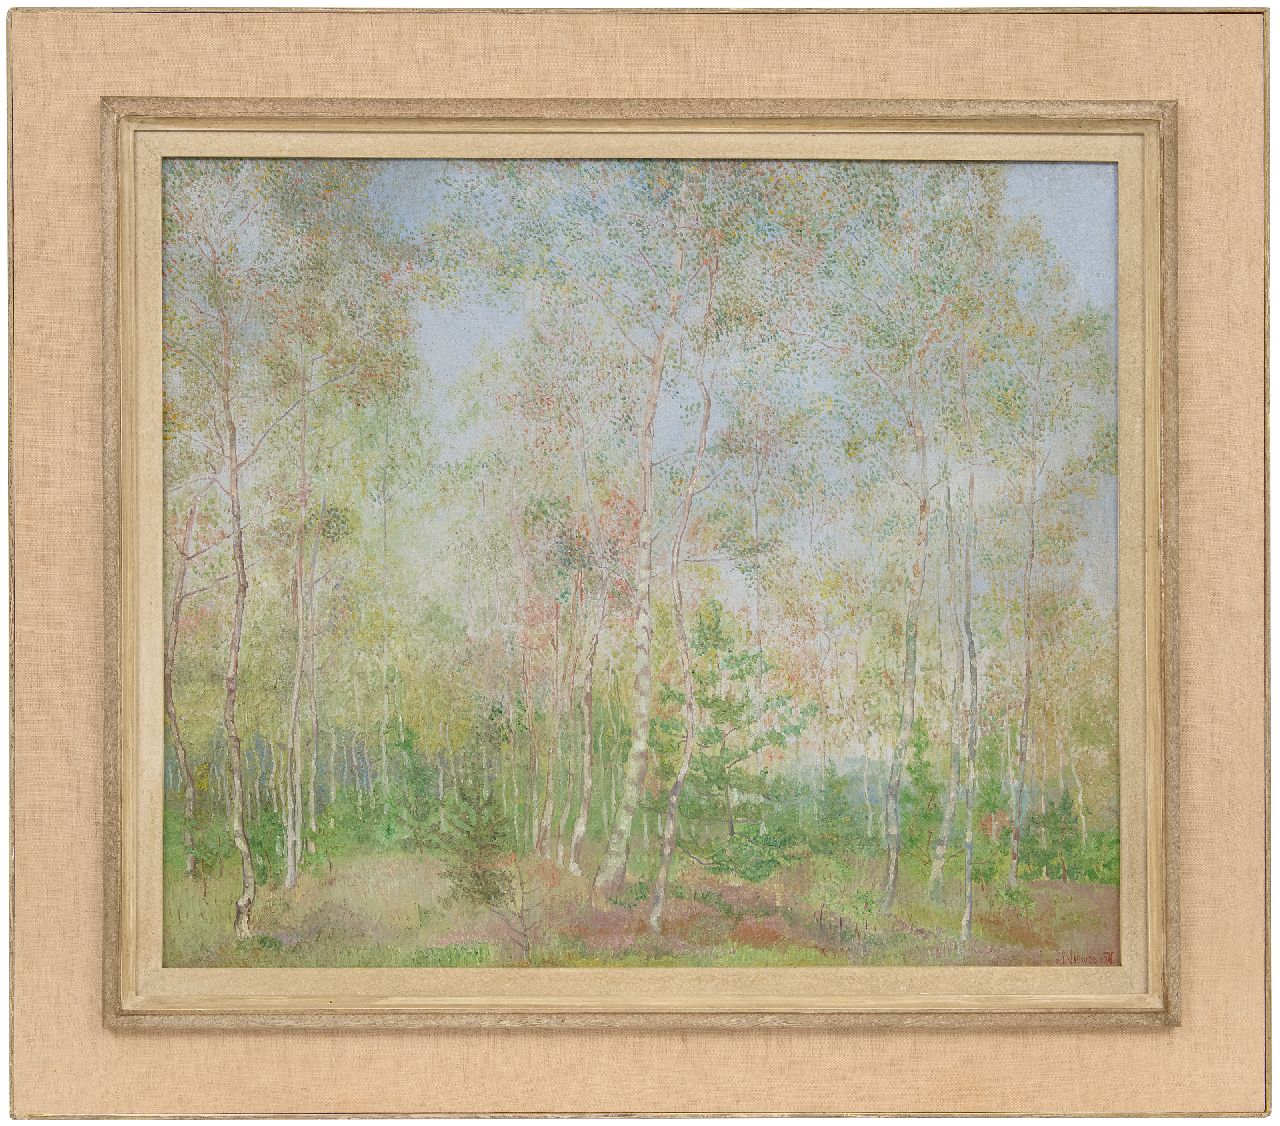 Nieweg J.  | Jakob Nieweg | Paintings offered for sale | Birch trees, oil on canvas 60.3 x 70.7 cm, signed l.r. and dated 1920